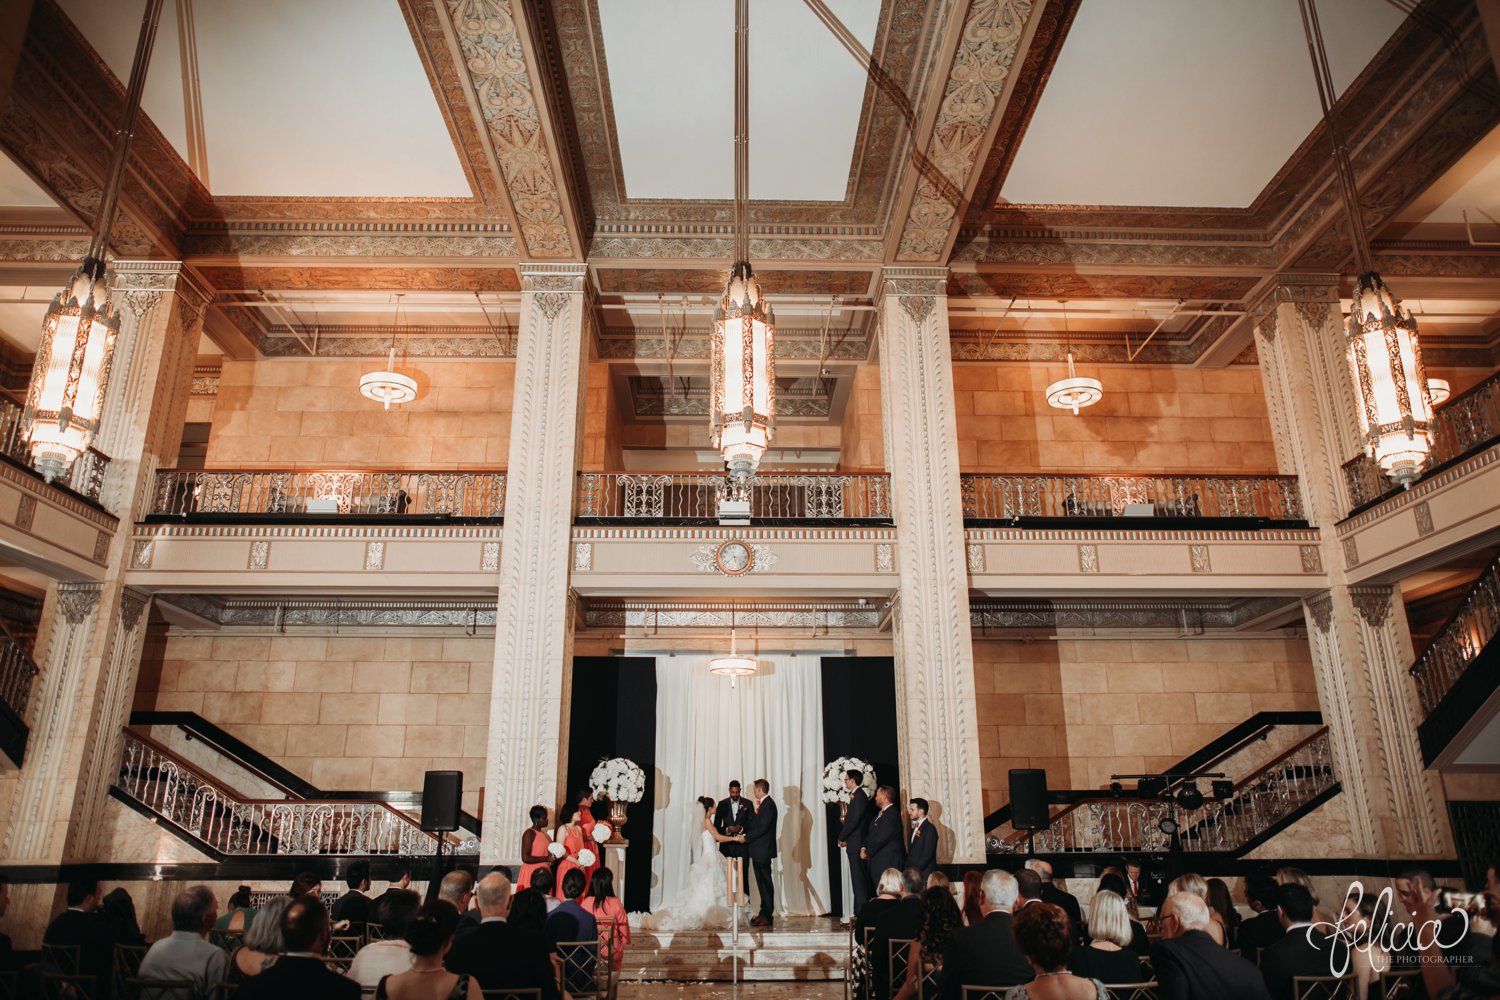 images by feliciathephotographer.com | destination wedding photographer | the grand hall at power and light | kansas city | missouri | downtown | glamorous | multicultural | ceremony | chandelier | venue | details | 